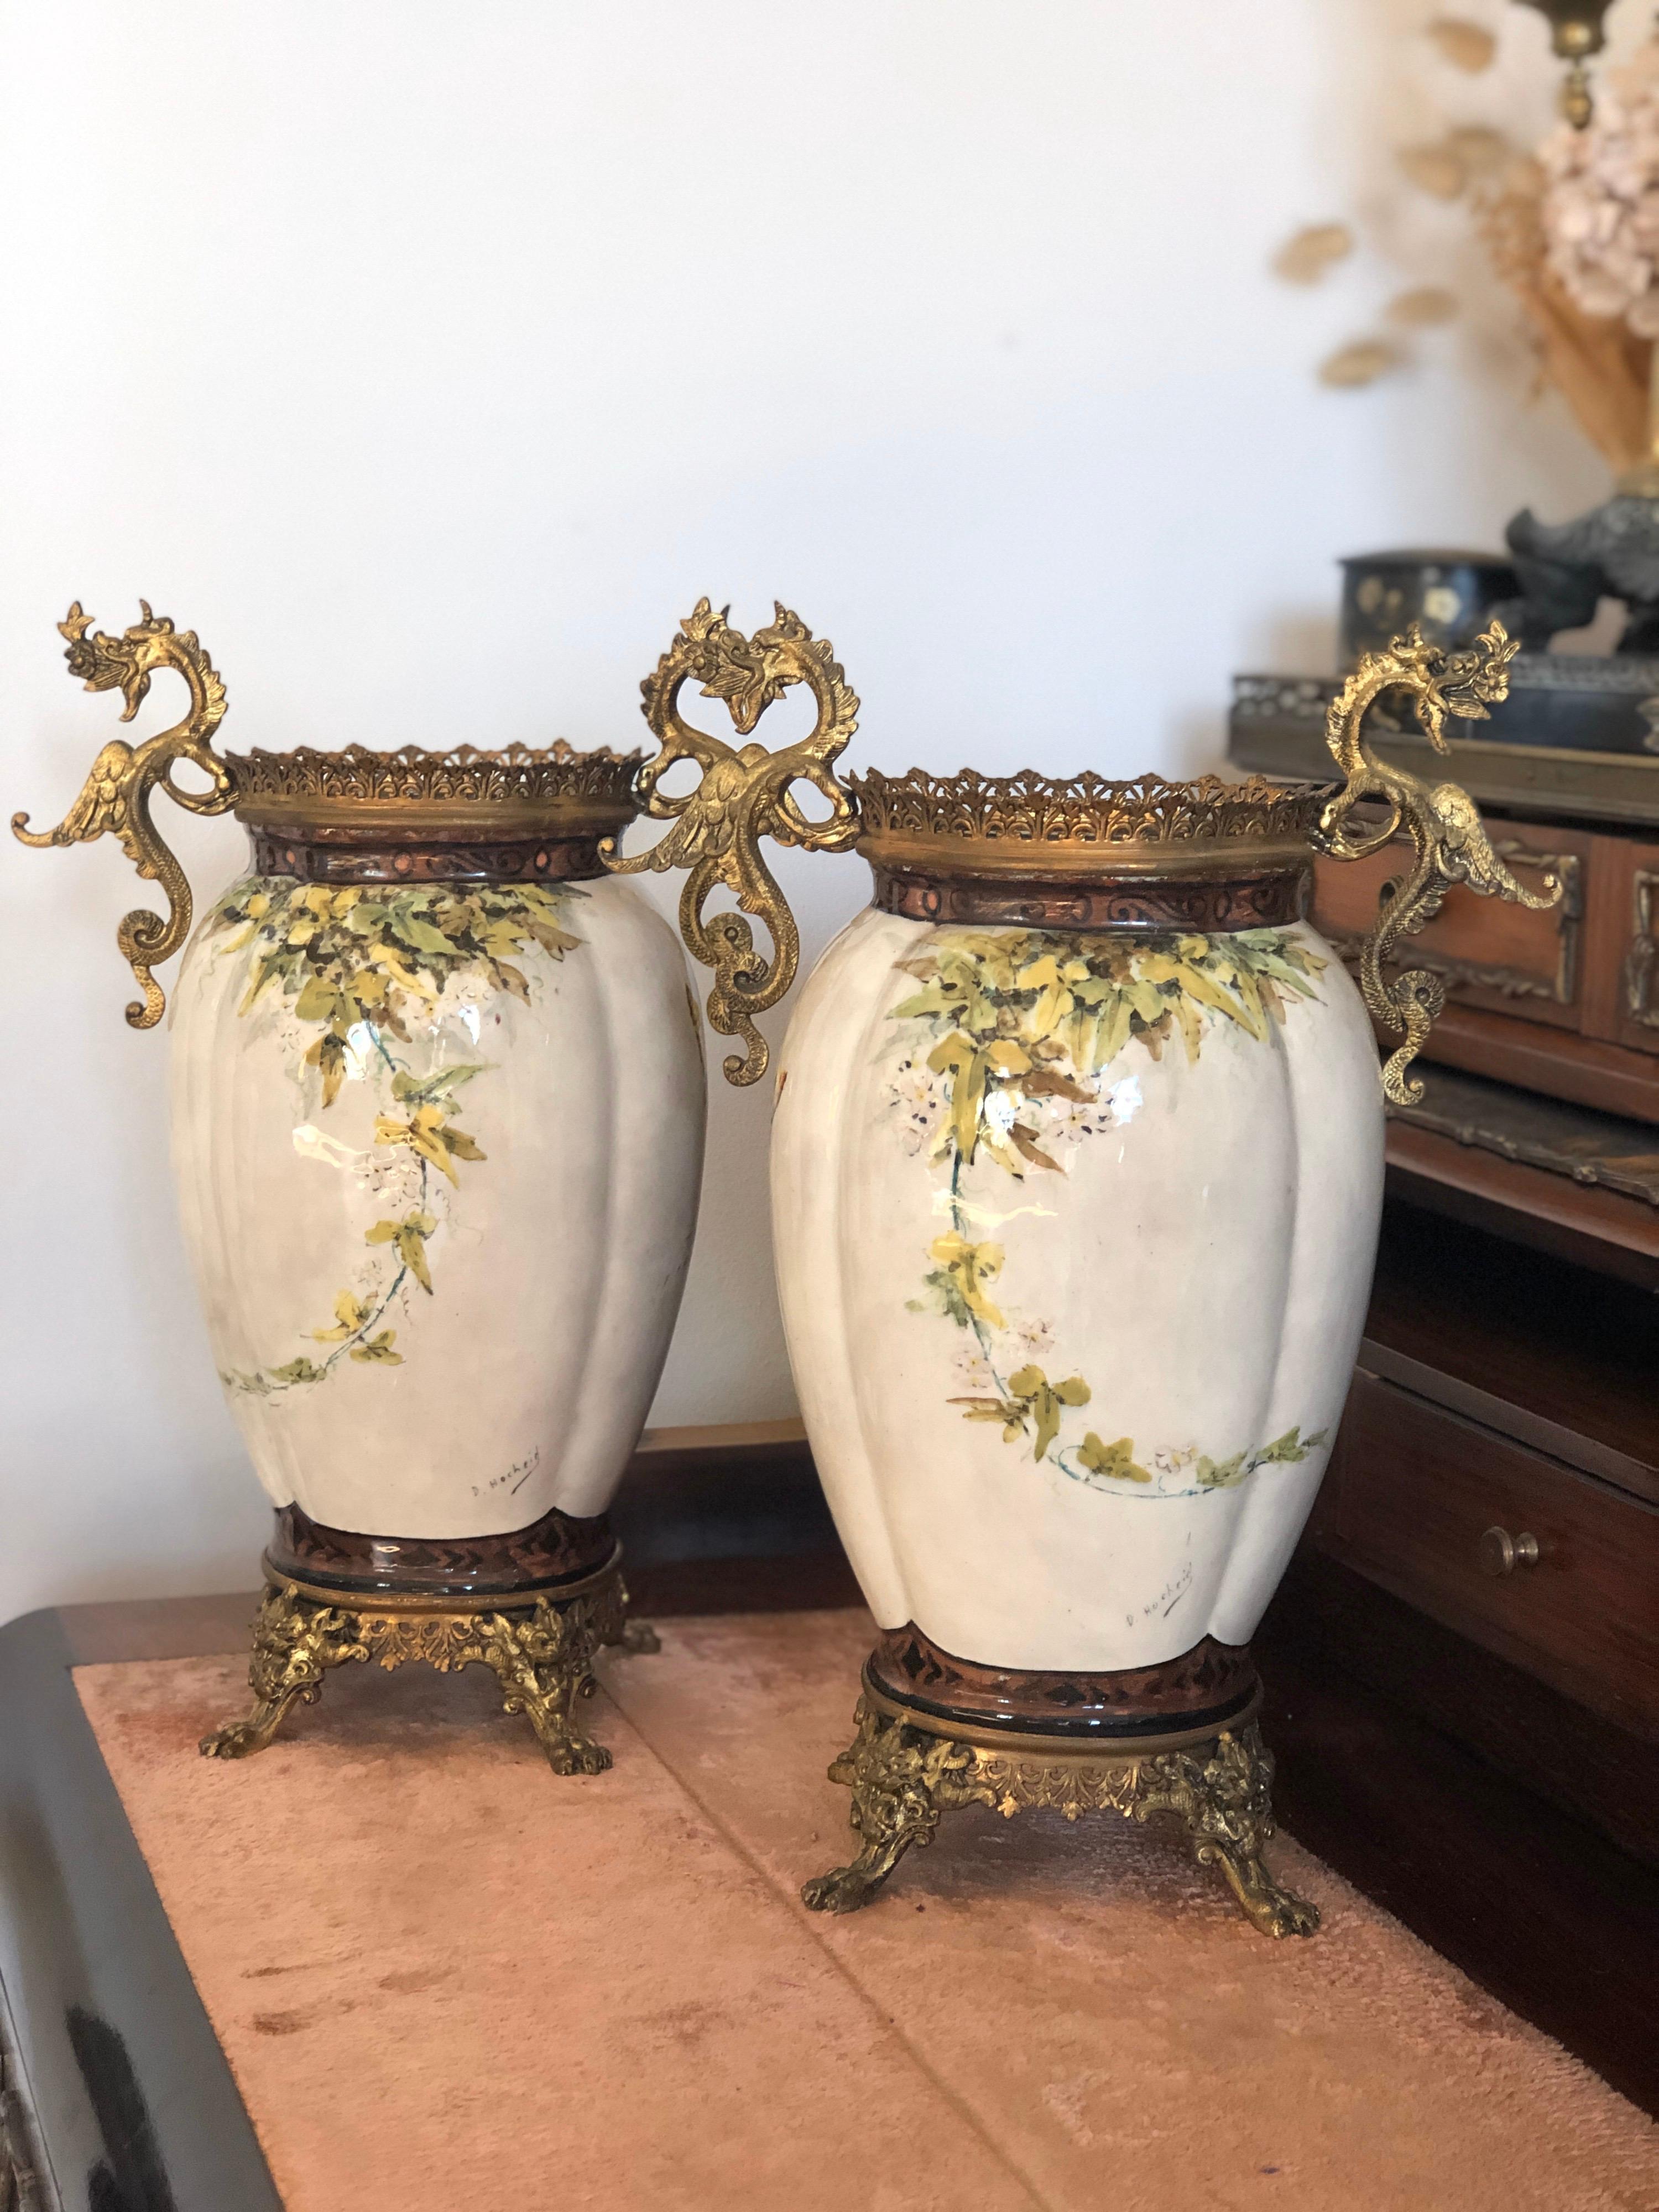 Pair of hand painted asymmetrical ceramic vases decorated with flowers and butterflies in light colors on beige base, and they are painted in cobalt blue inside. Both are raised over brass legs and have brass crowns on the top and brass hendles